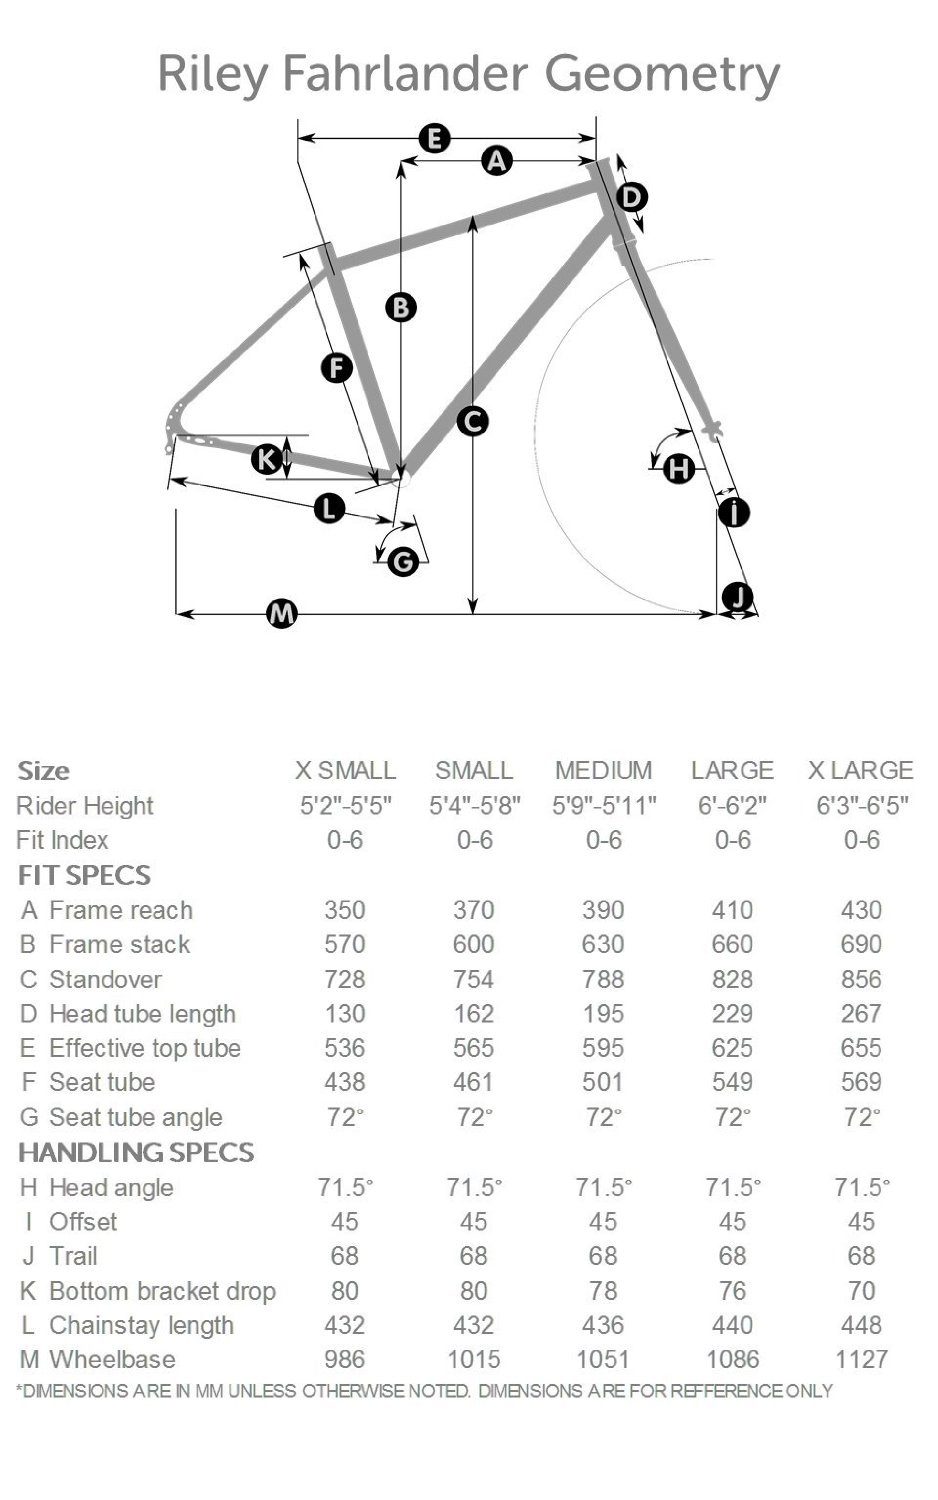 Picture of Fitwell Bicycle Company Fahrlander sizing chart